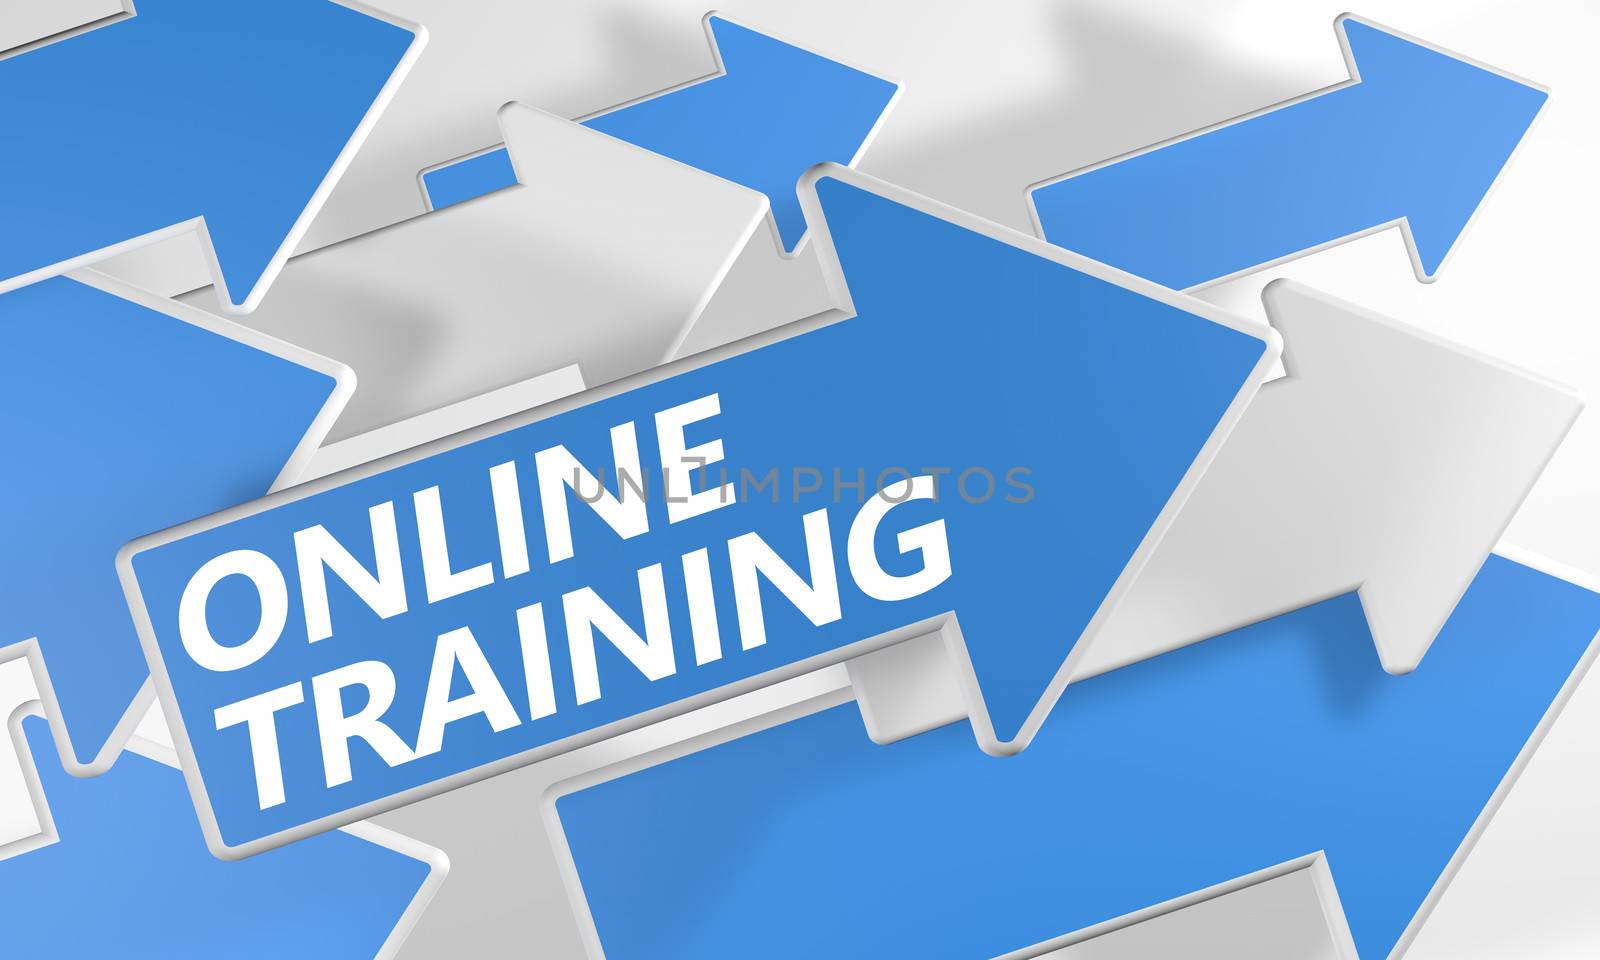 Online Training 3d render concept with blue and white arrows flying over a white background.